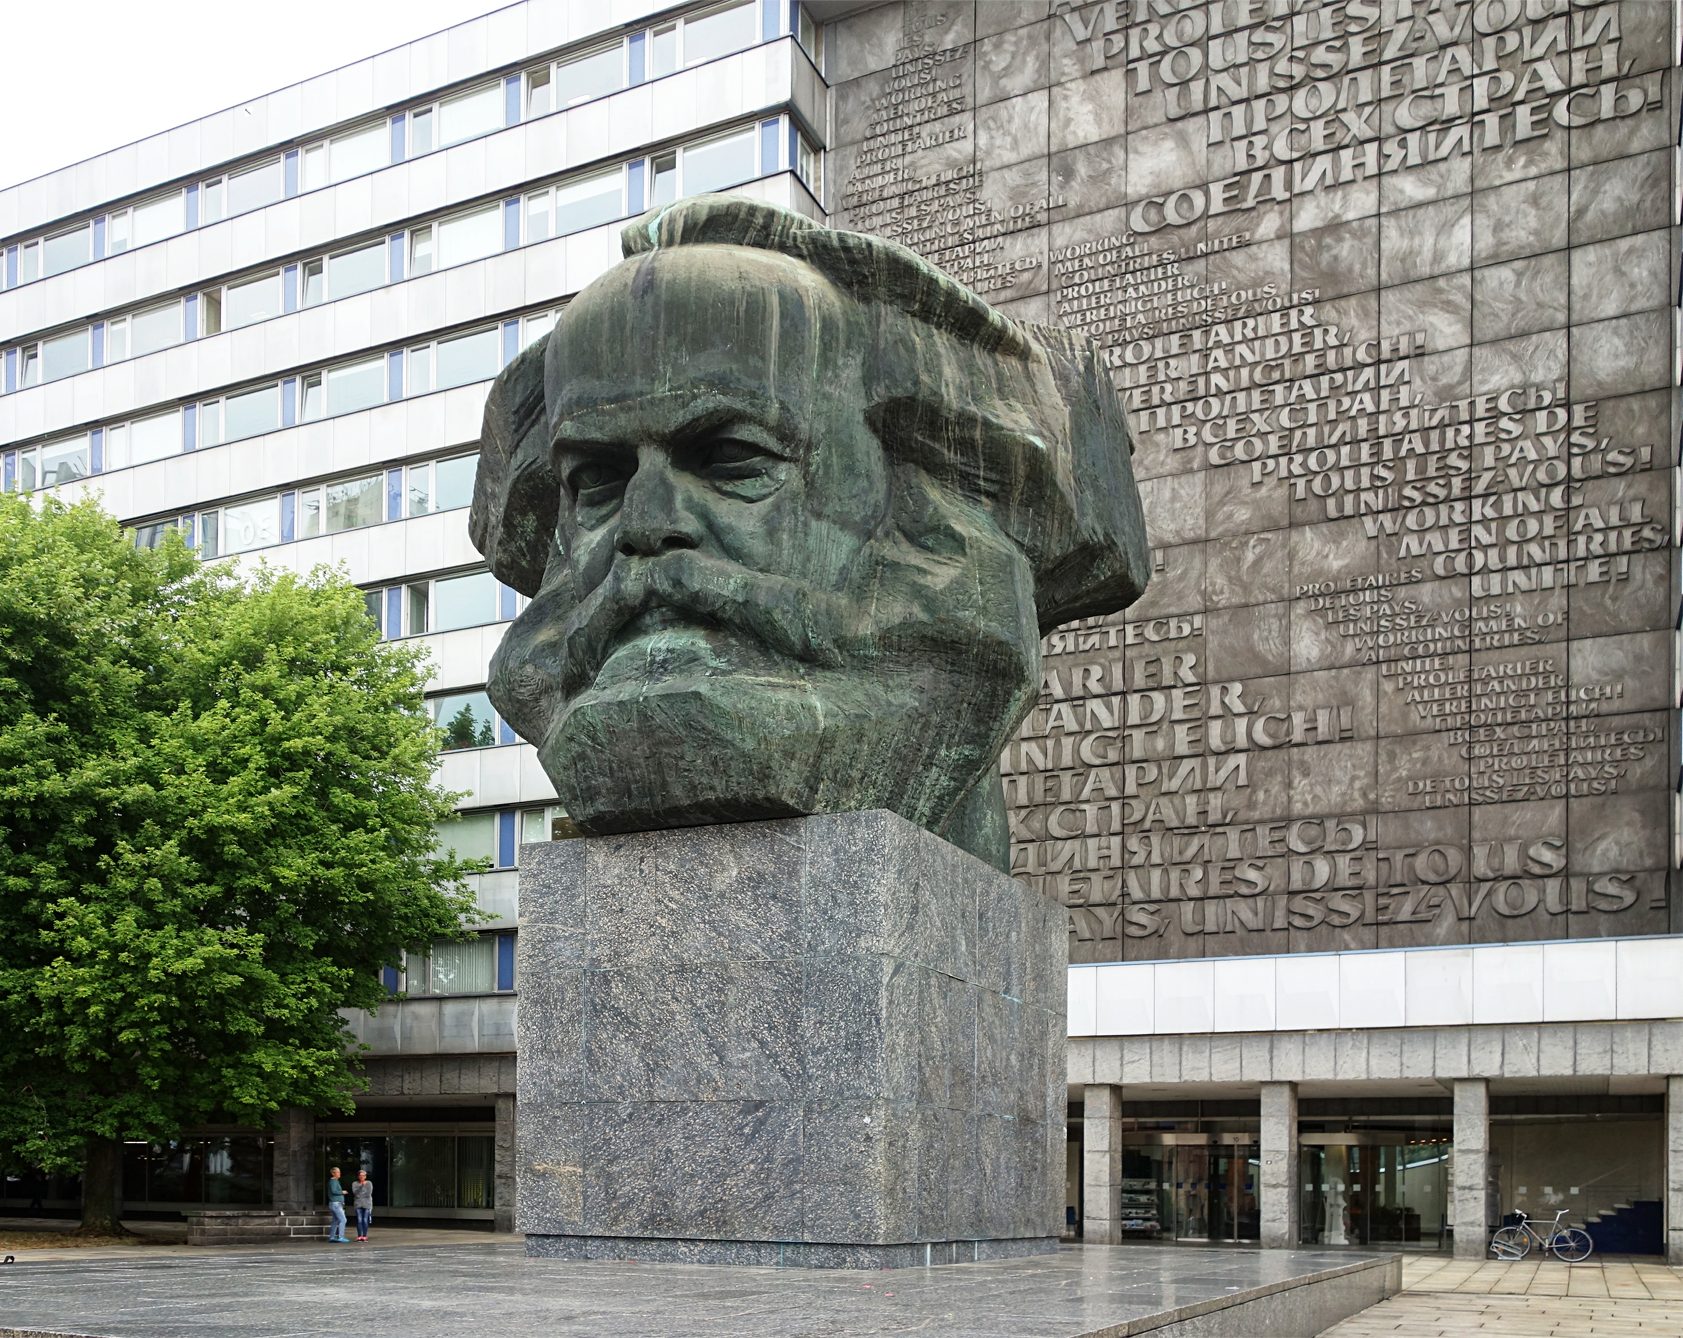 A monument to Karl Marx in front of a building in Chemnitz, Saxony, Germany.